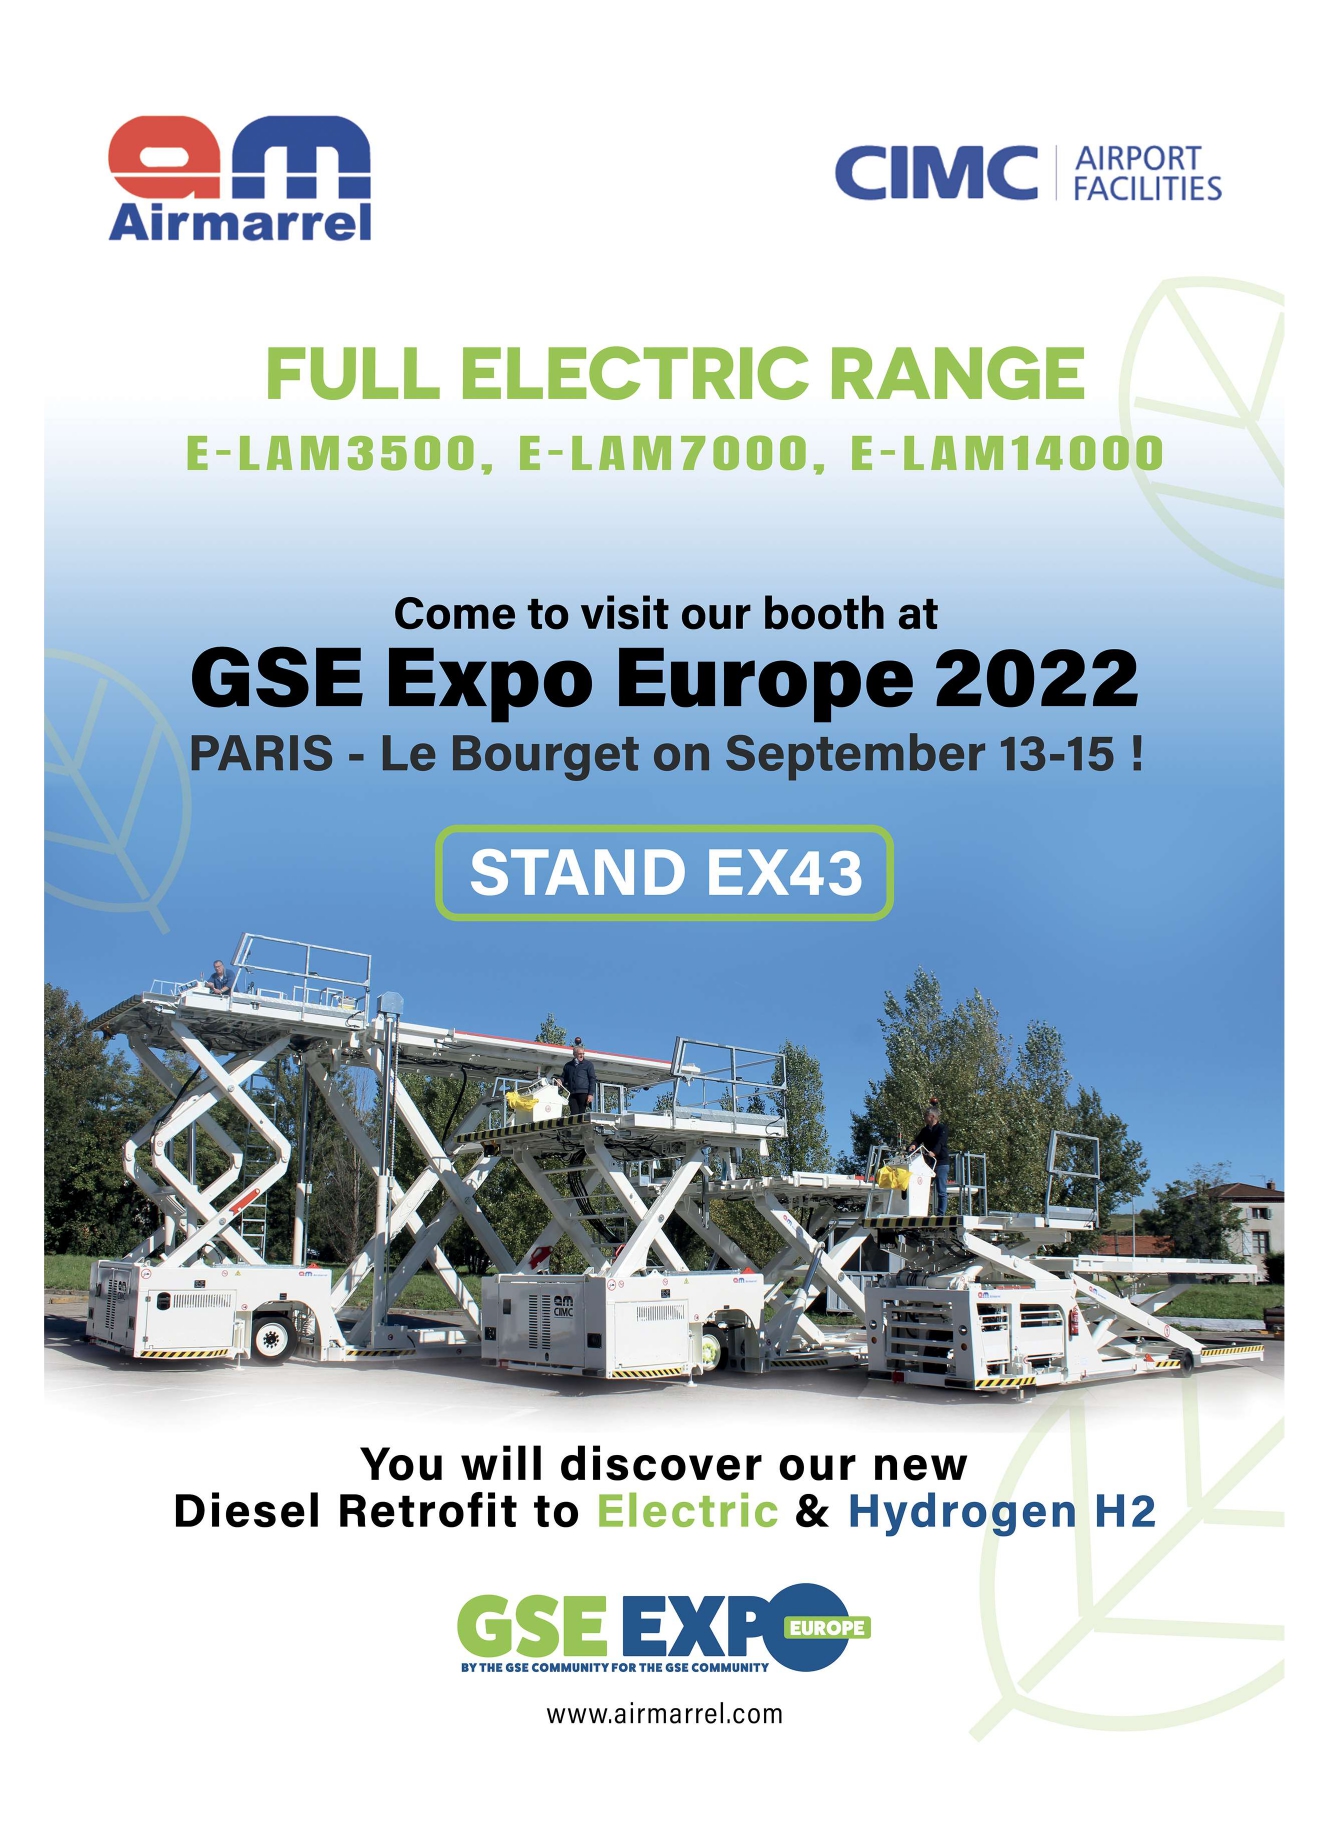 GSE EXPO - LE BOURGET